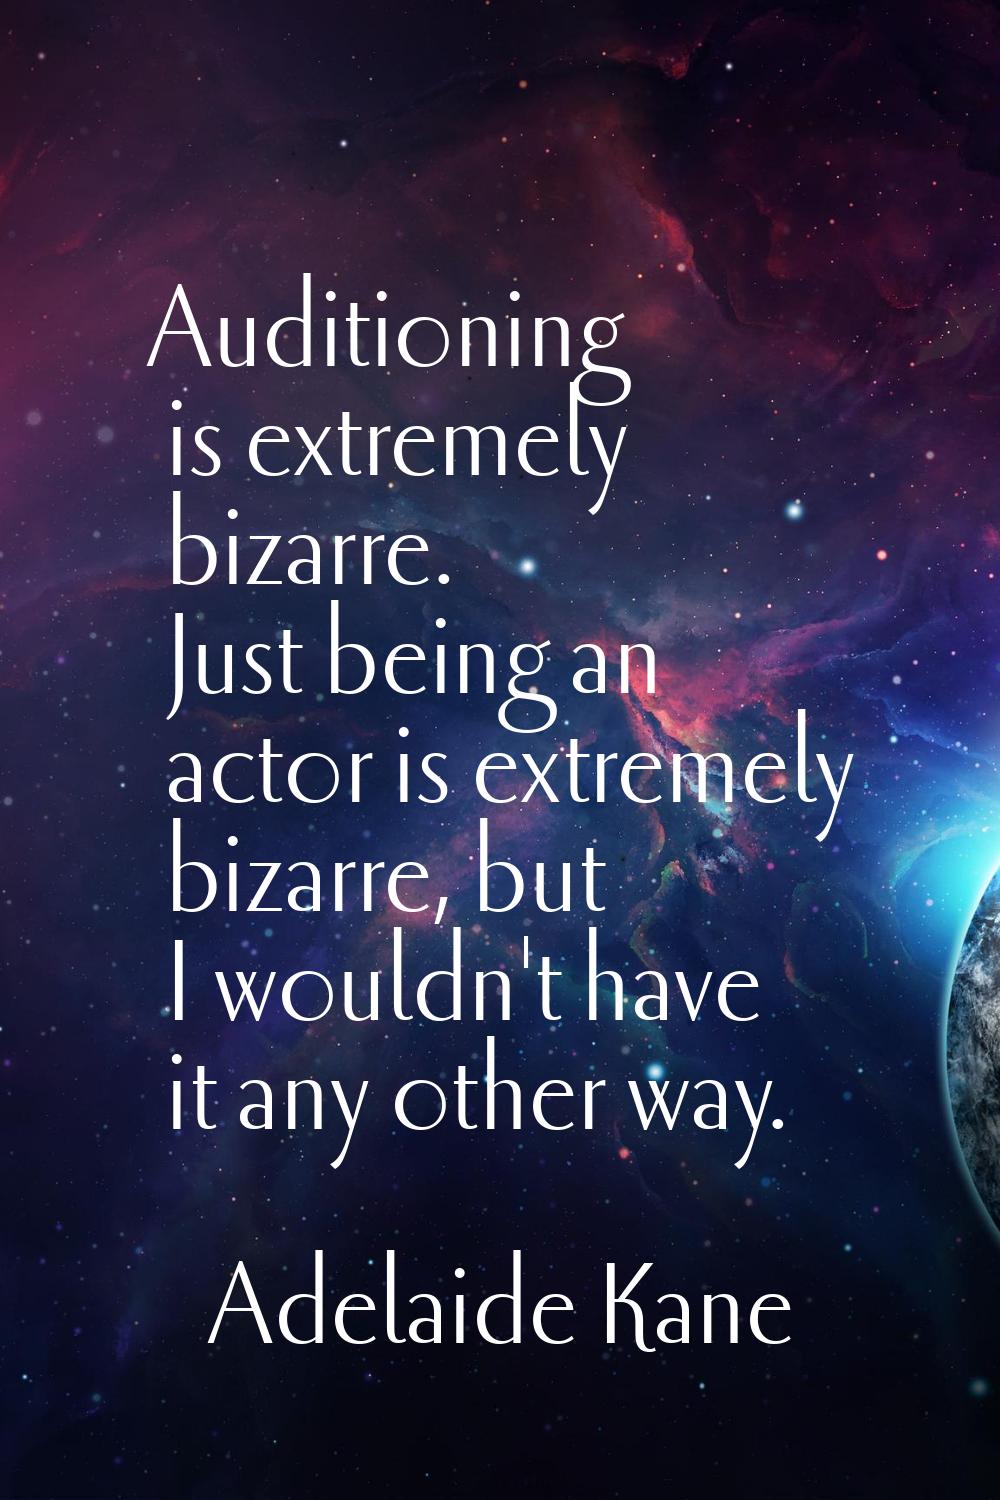 Auditioning is extremely bizarre. Just being an actor is extremely bizarre, but I wouldn't have it 